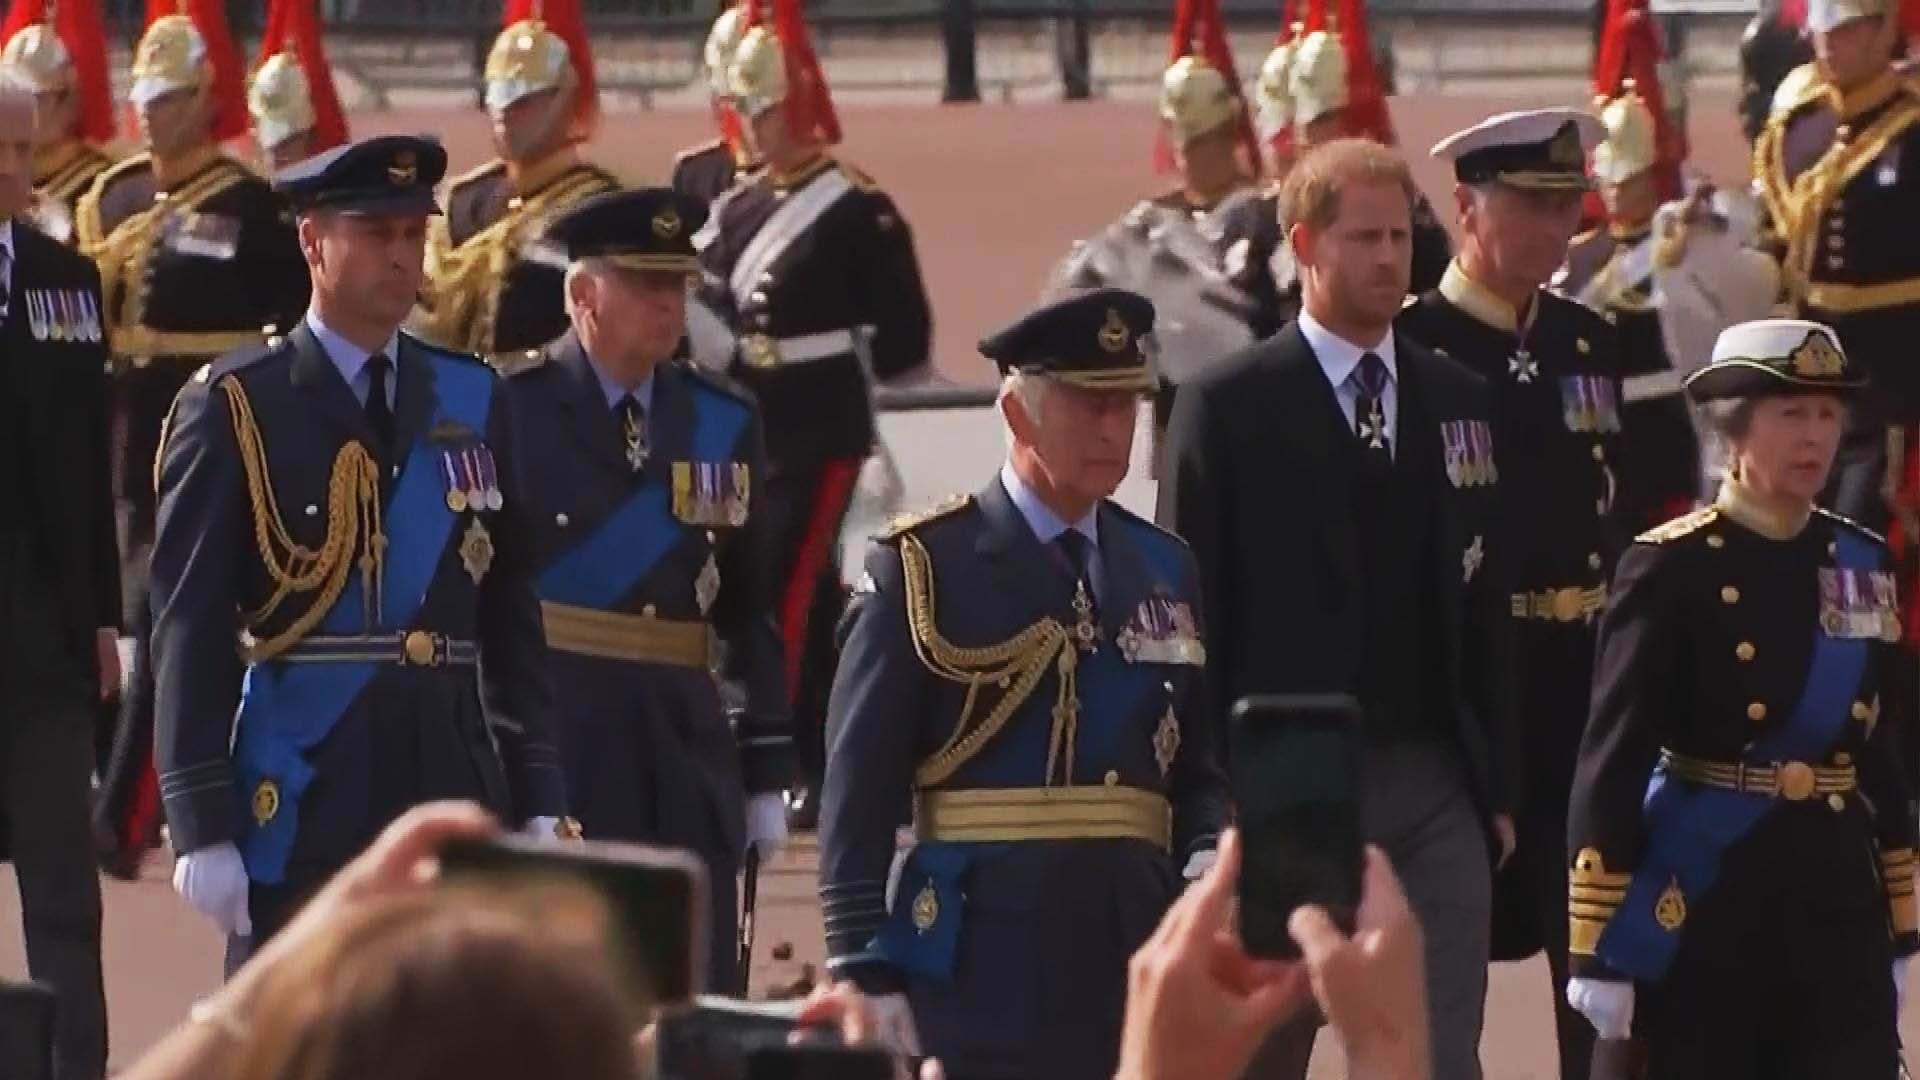 Prince Harry and Prince William Walk Behind Queen Elizabeth's Coffin Procession